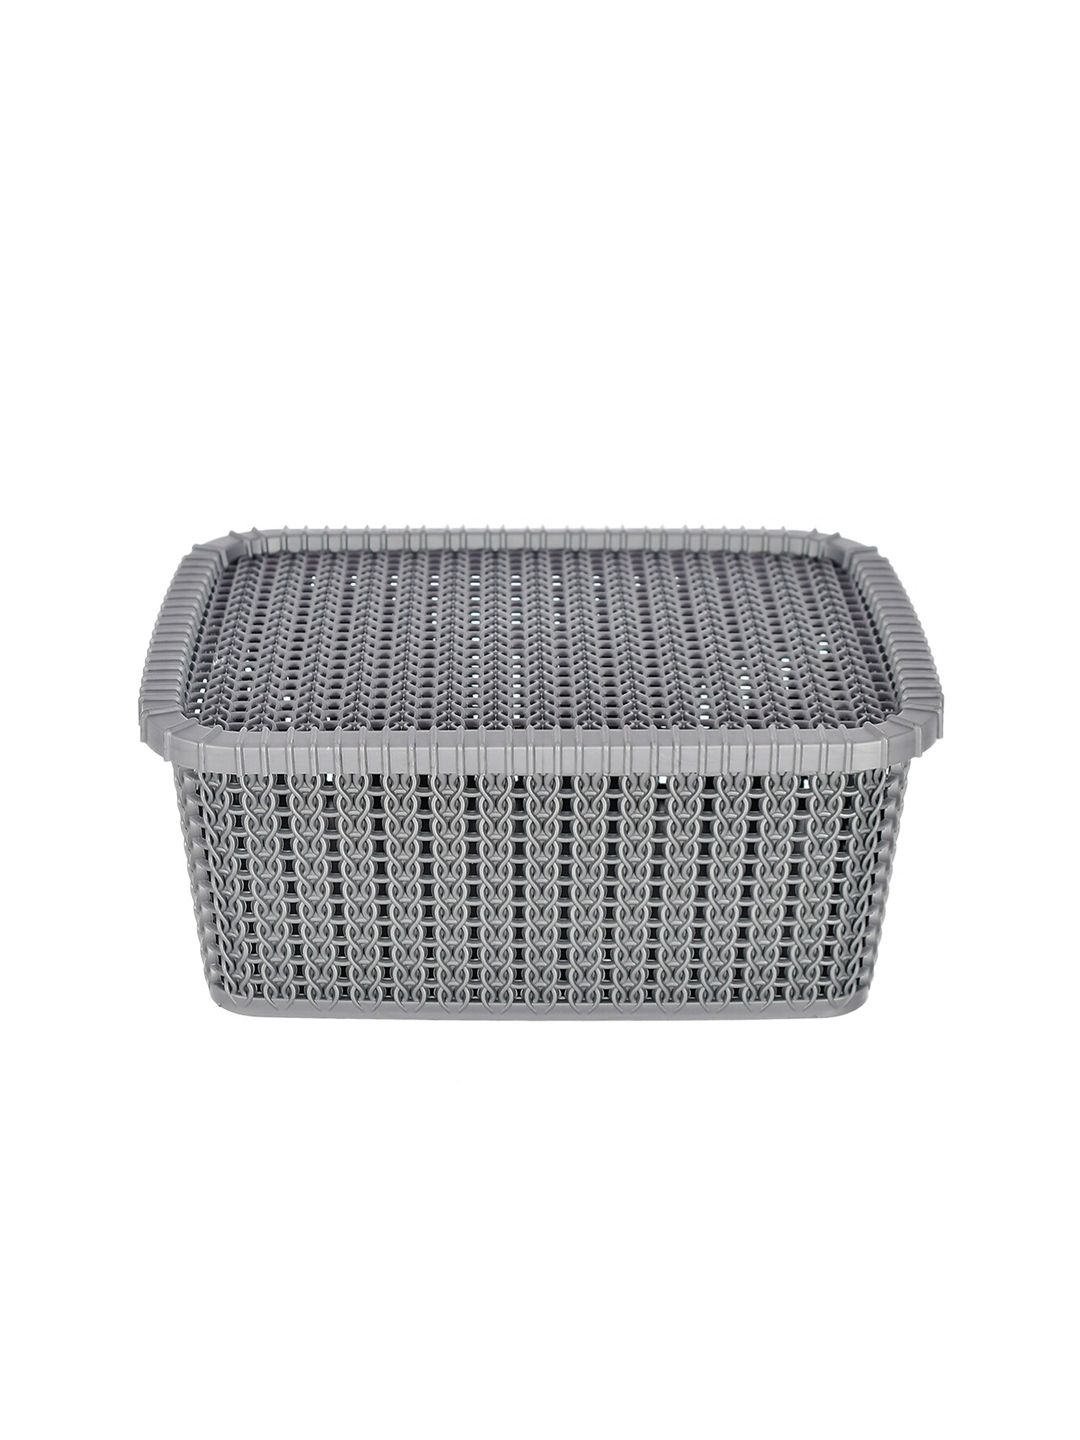 Kuber Industries Grey Textured Multipurpose Basket With Lids Price in India